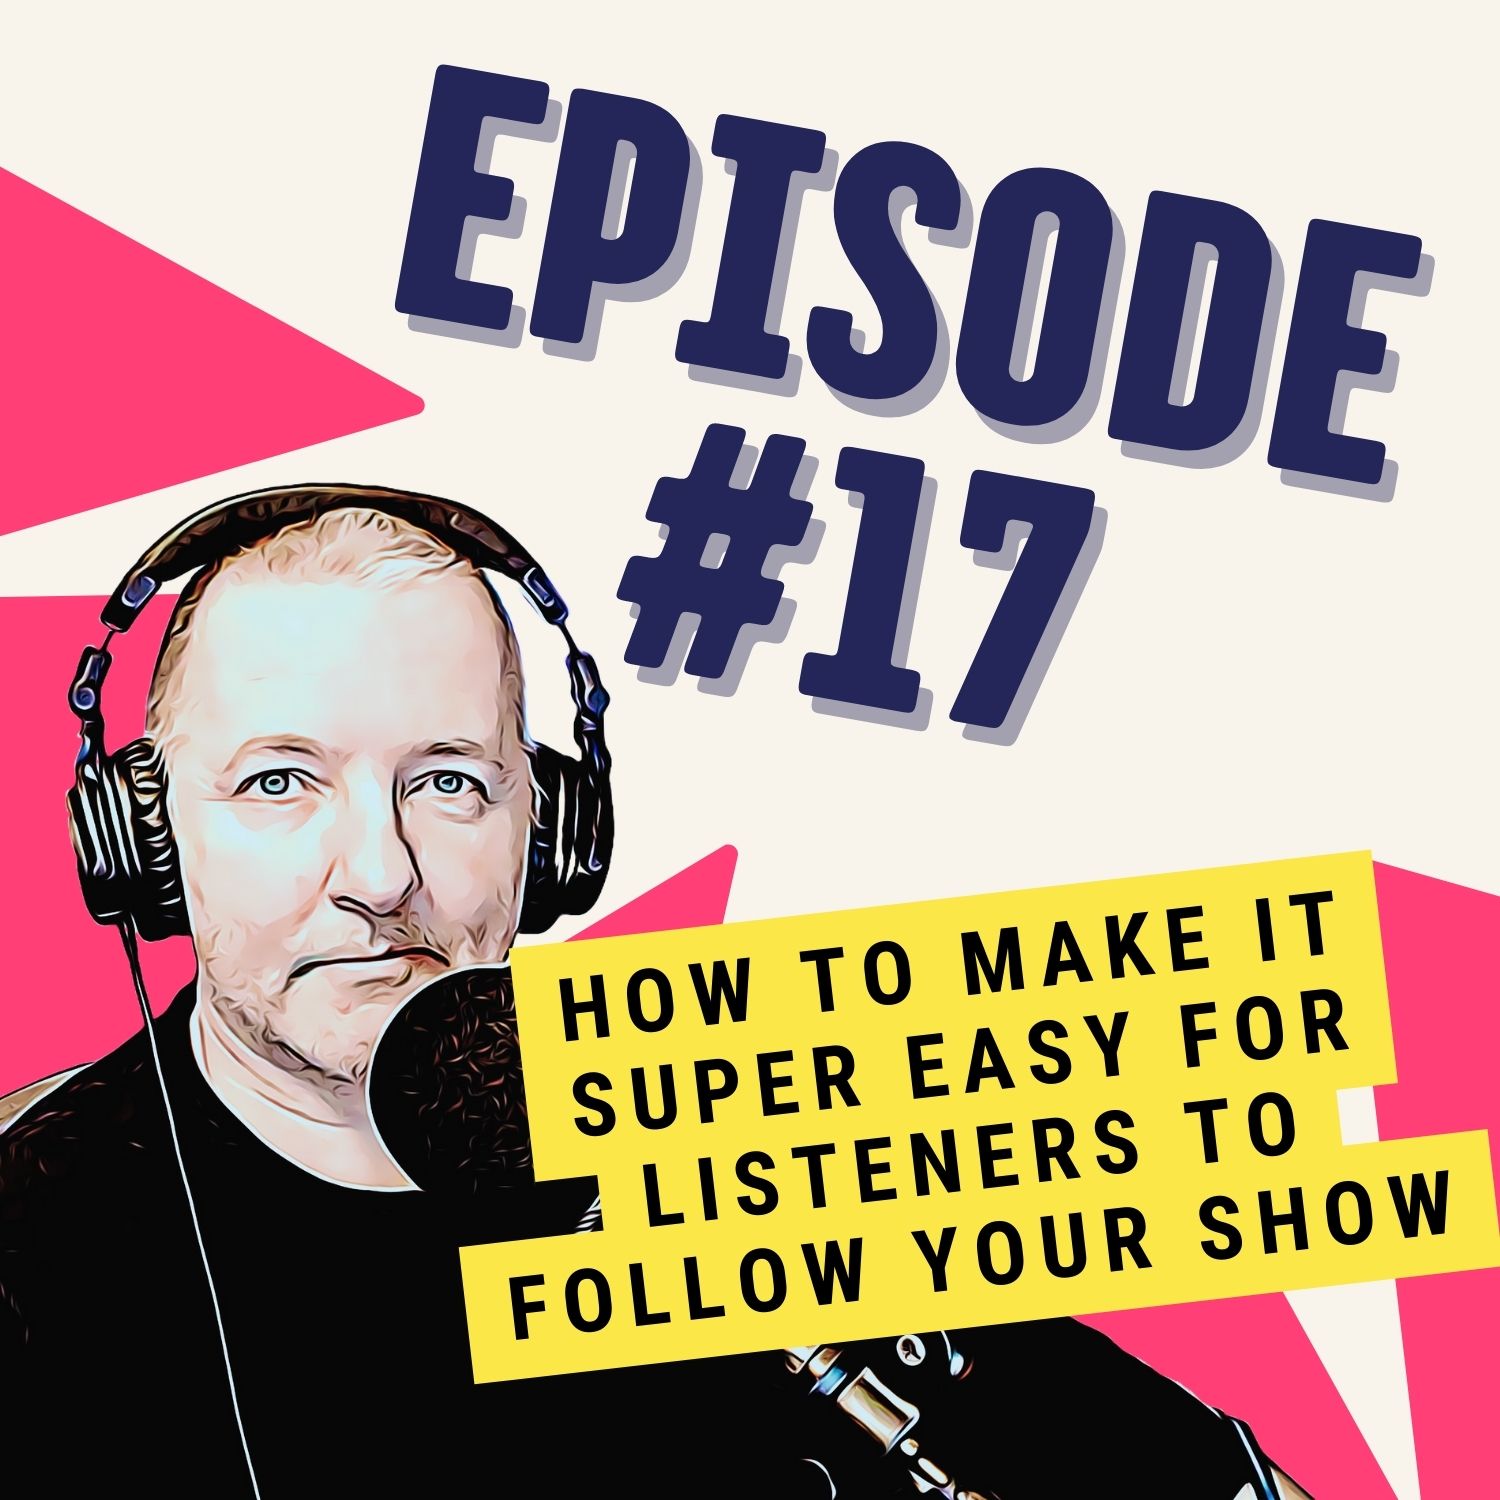 How to Make It Super Easy for Listeners to Follow Your Show